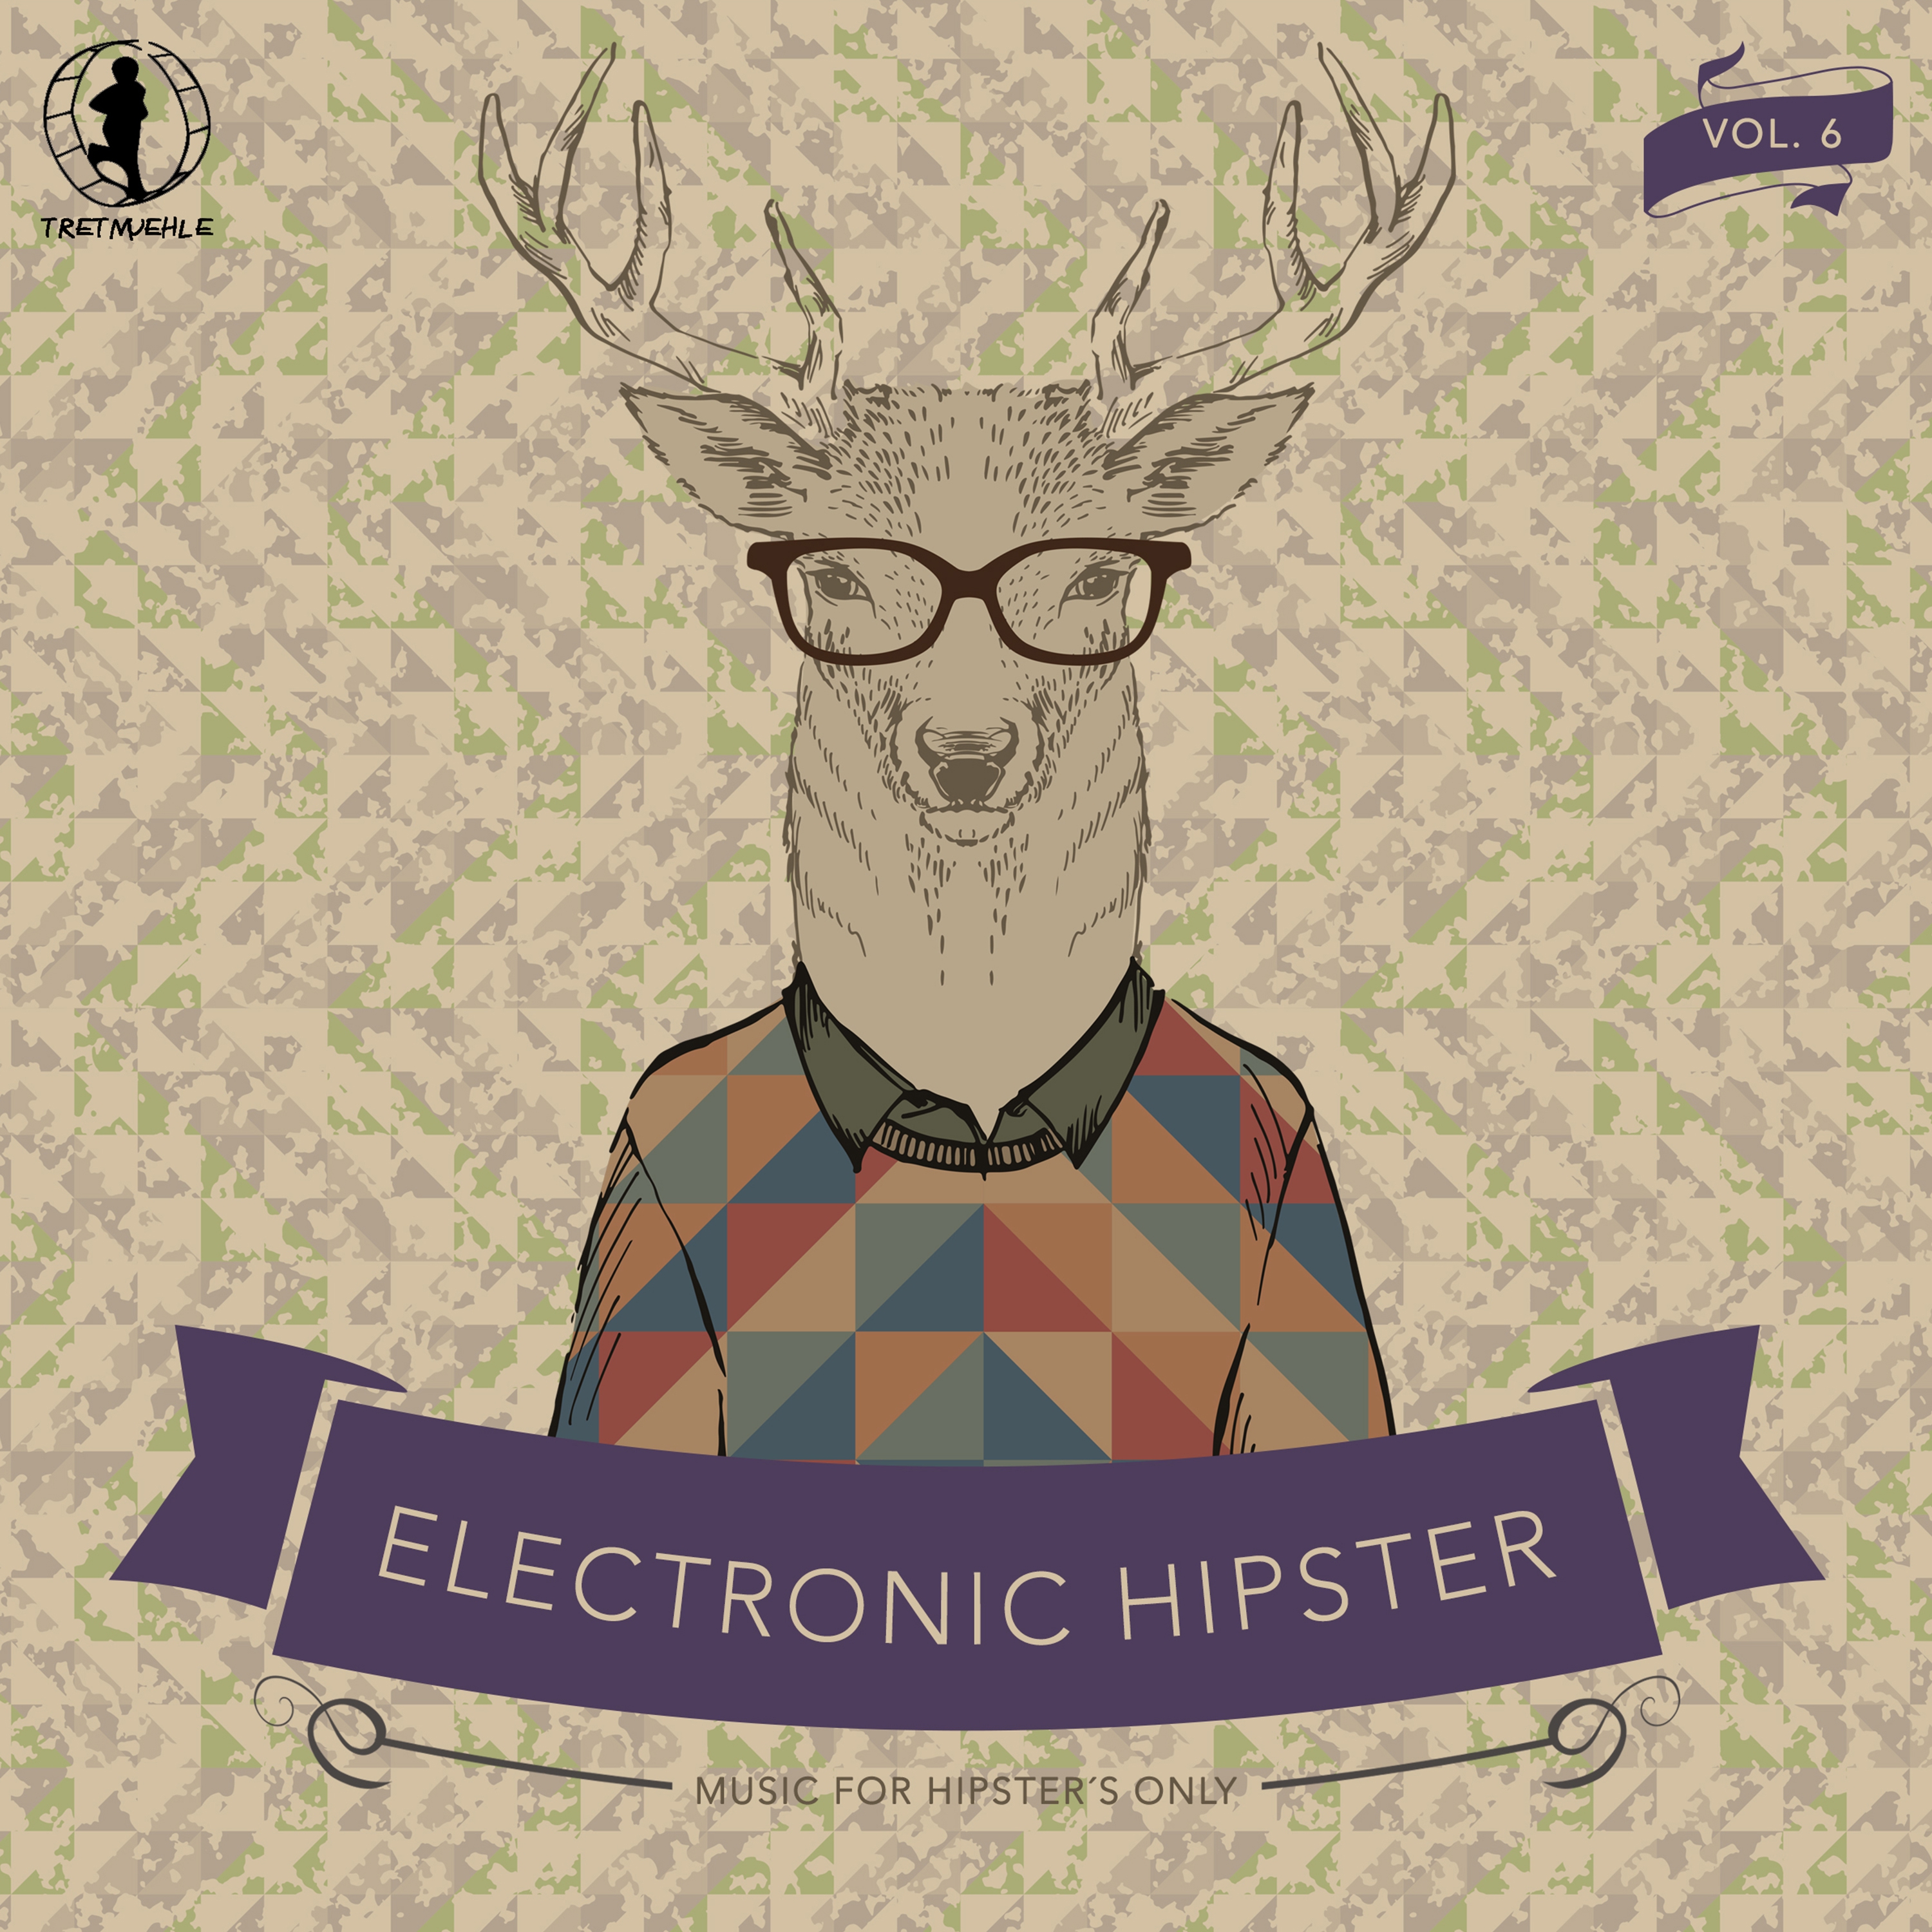 Electronic Hipster, Vol. 6